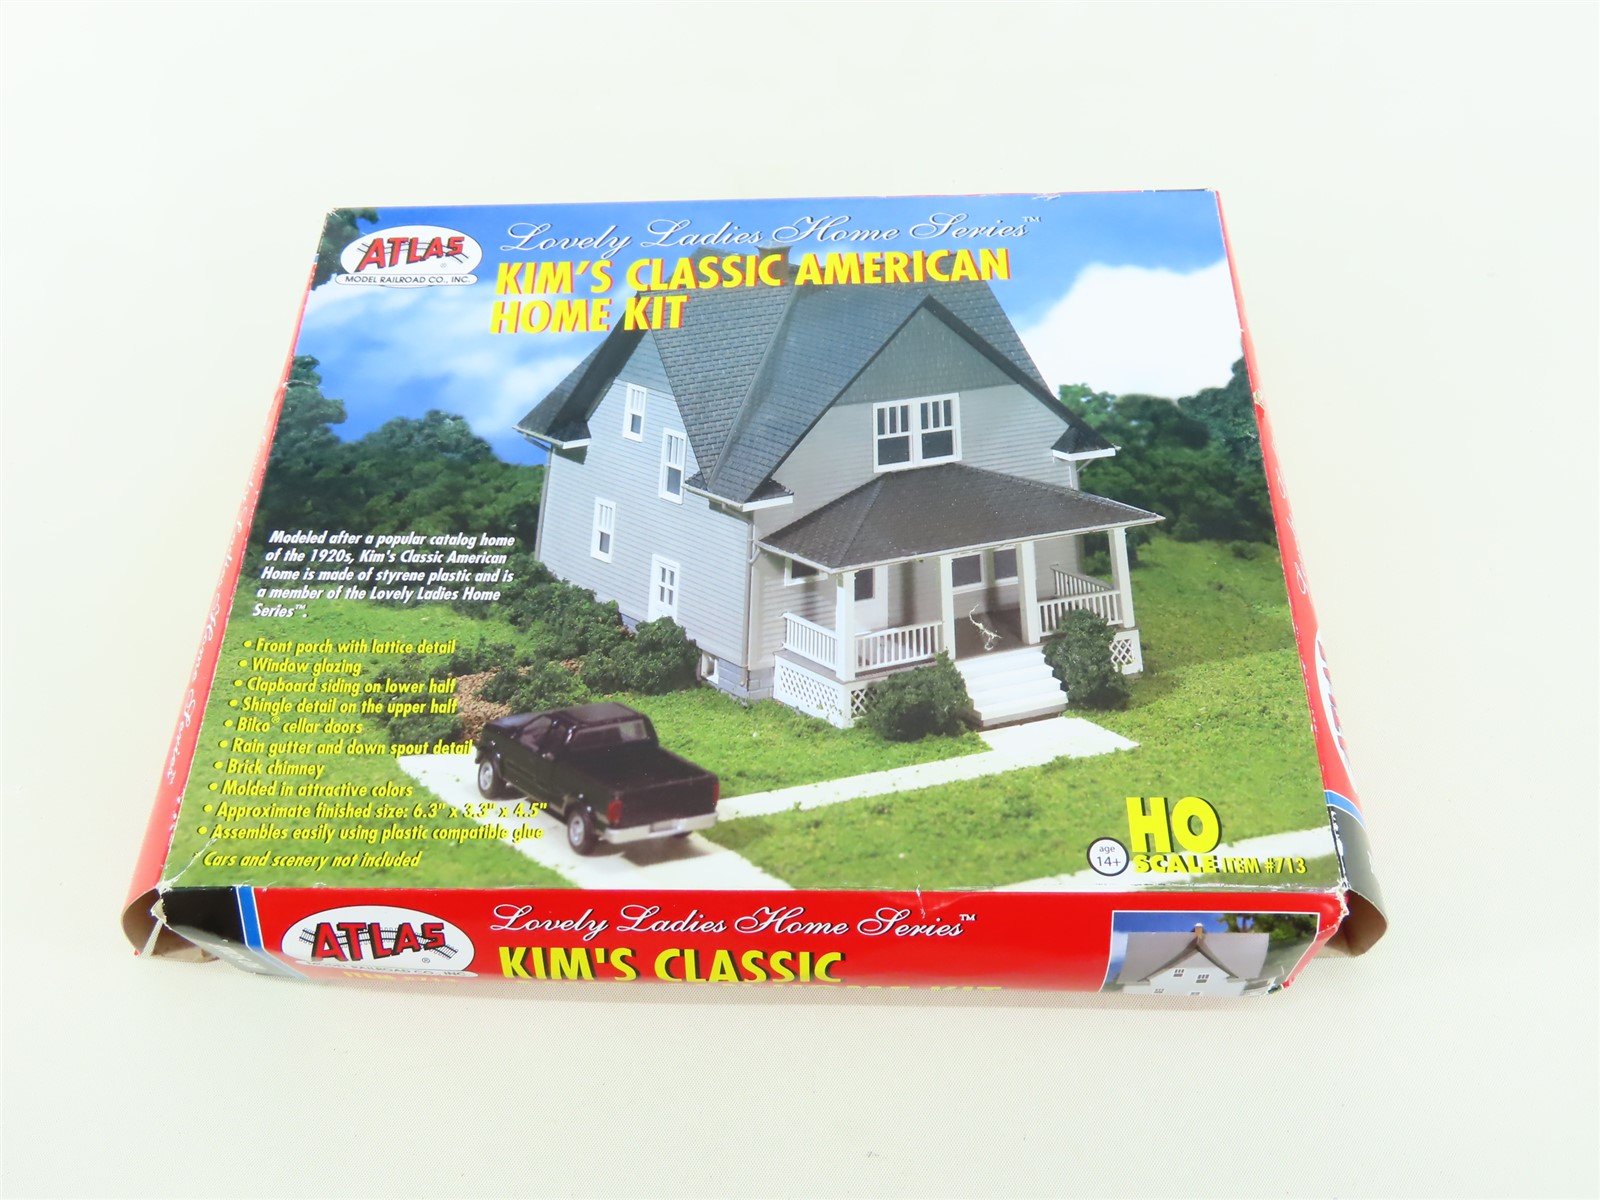 HO Scale Atlas Lovely Ladies Home Series Kit #713 Kim's Classic American Home